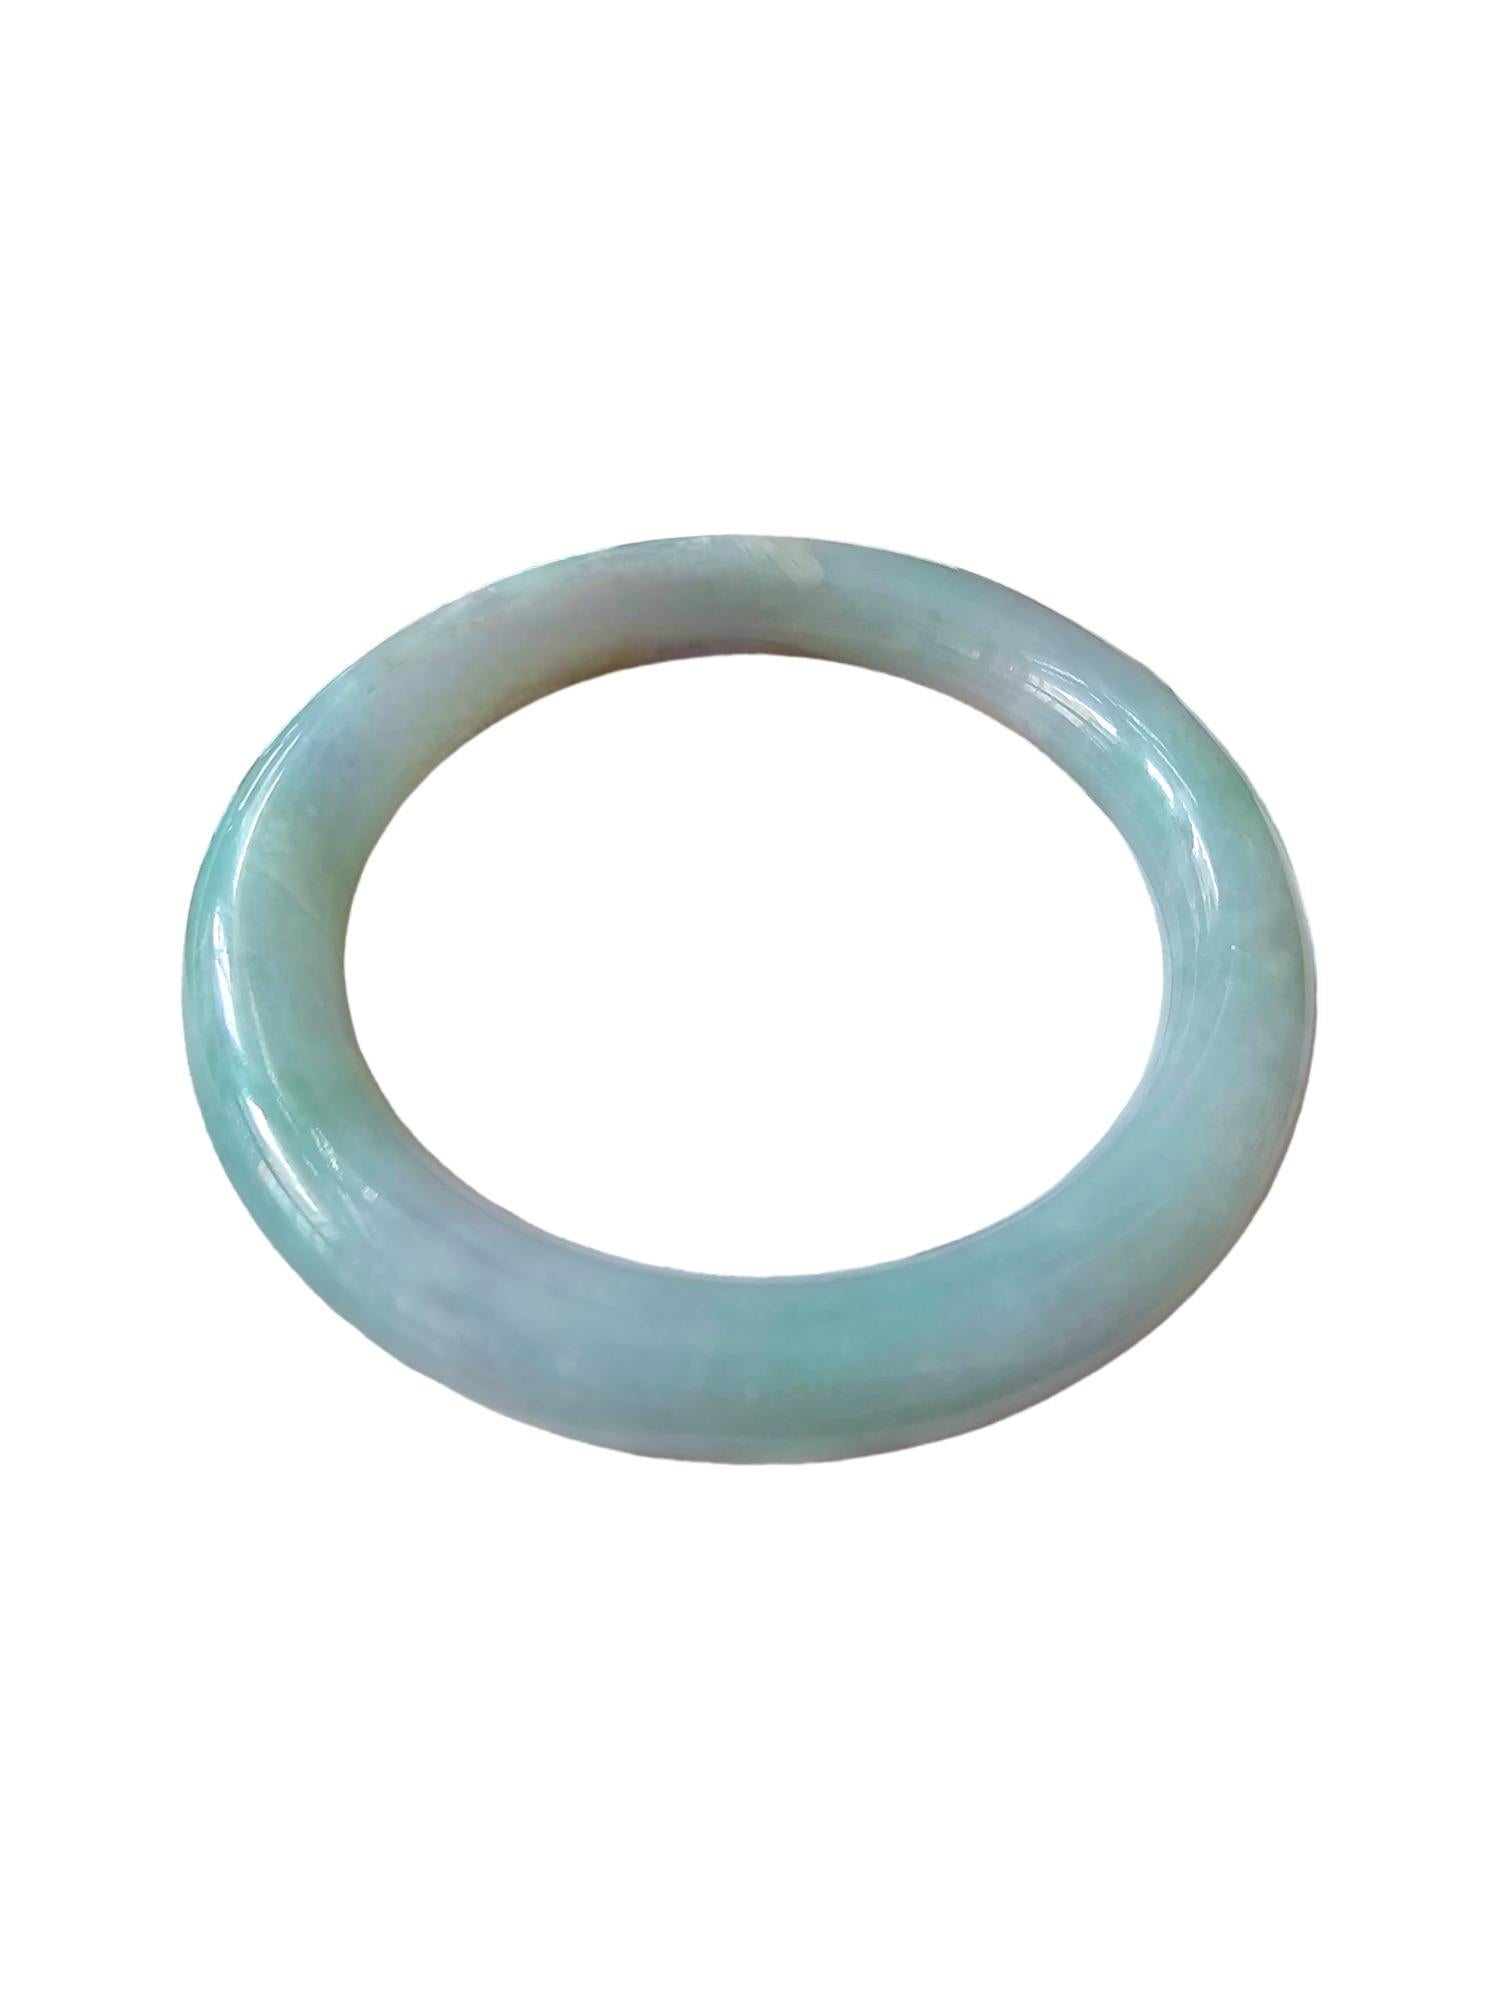 Burmese A-Jadeite Jade Bangle Bracelet; Green, Grey, White Jadeite 08810 - 100% designed, crafted, made and finished in Hong Kong. Handmade and Machine-quality checked.

Our 'Earths' Bangle Bracelets are all one-of-one pieces;

This piece is famed